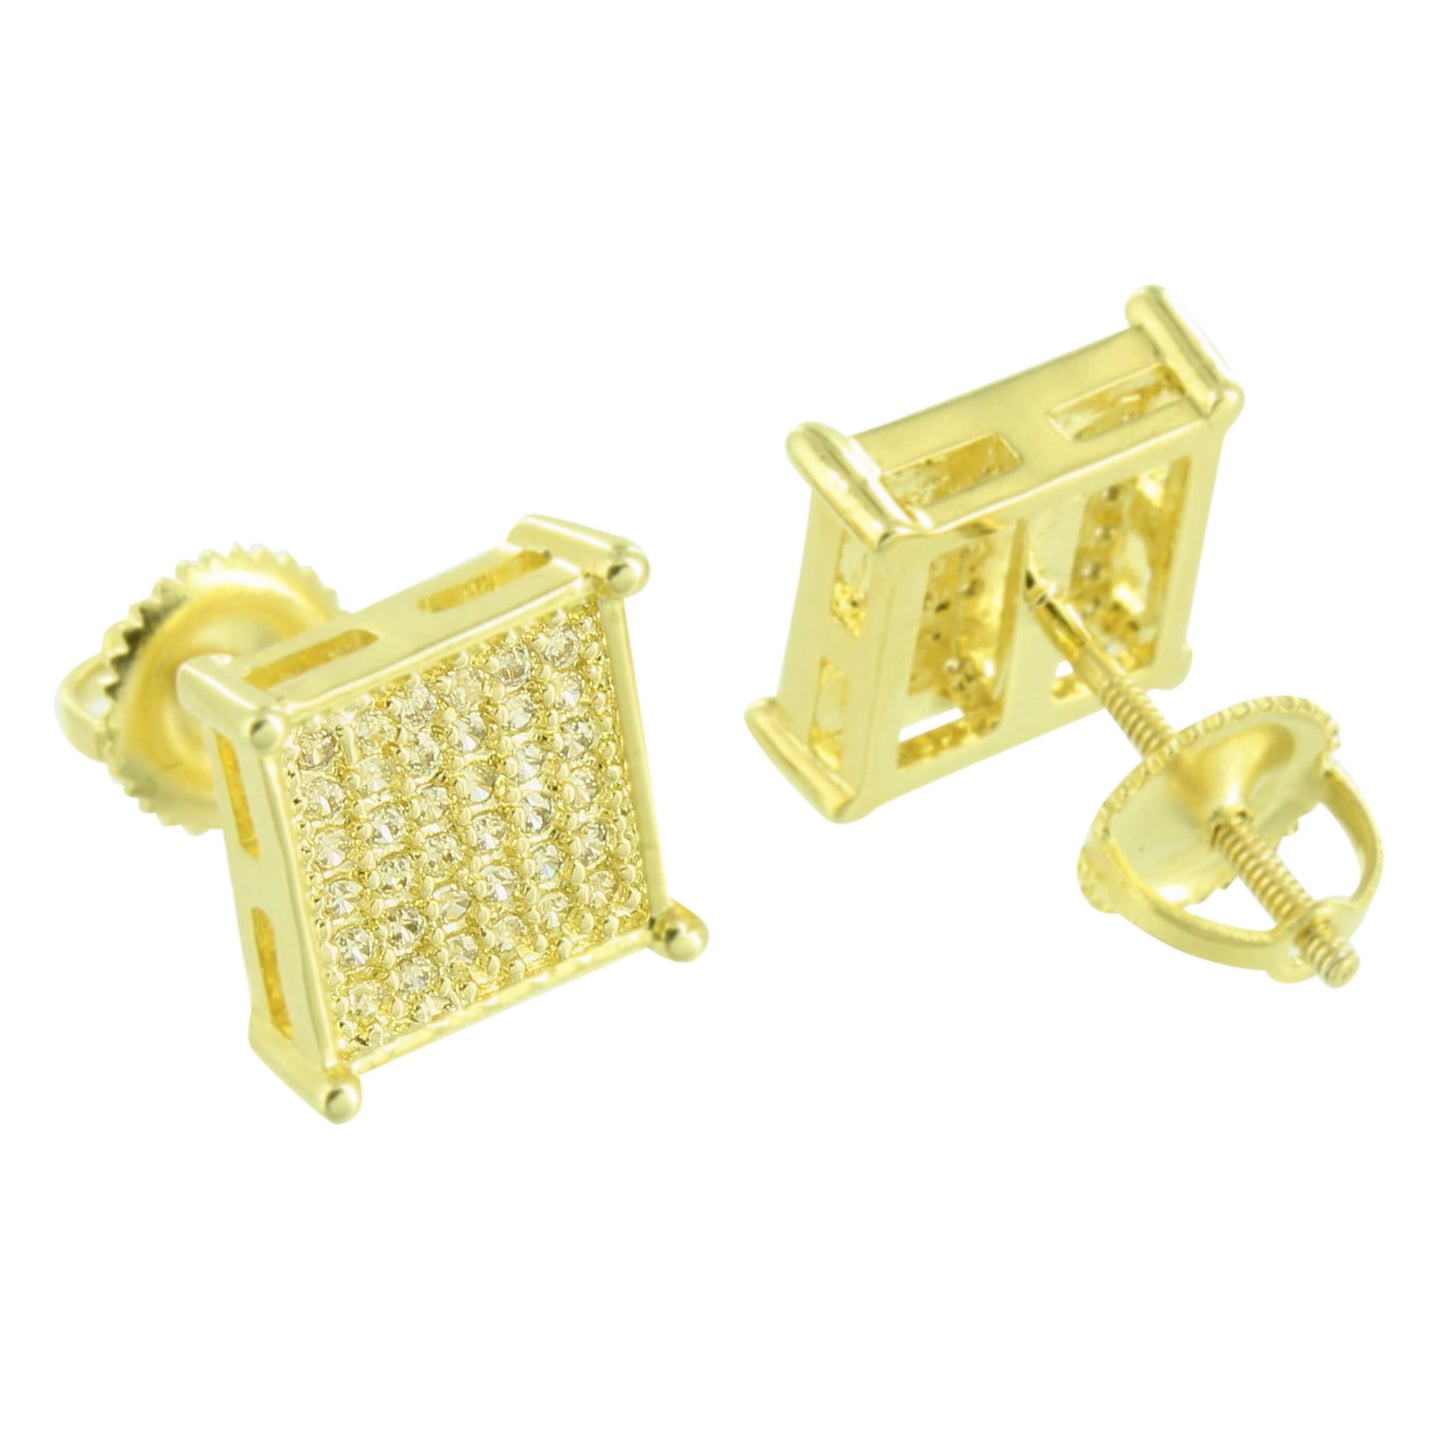 Canary Square Design Earrings Screw Back Mens Classy 8 MM